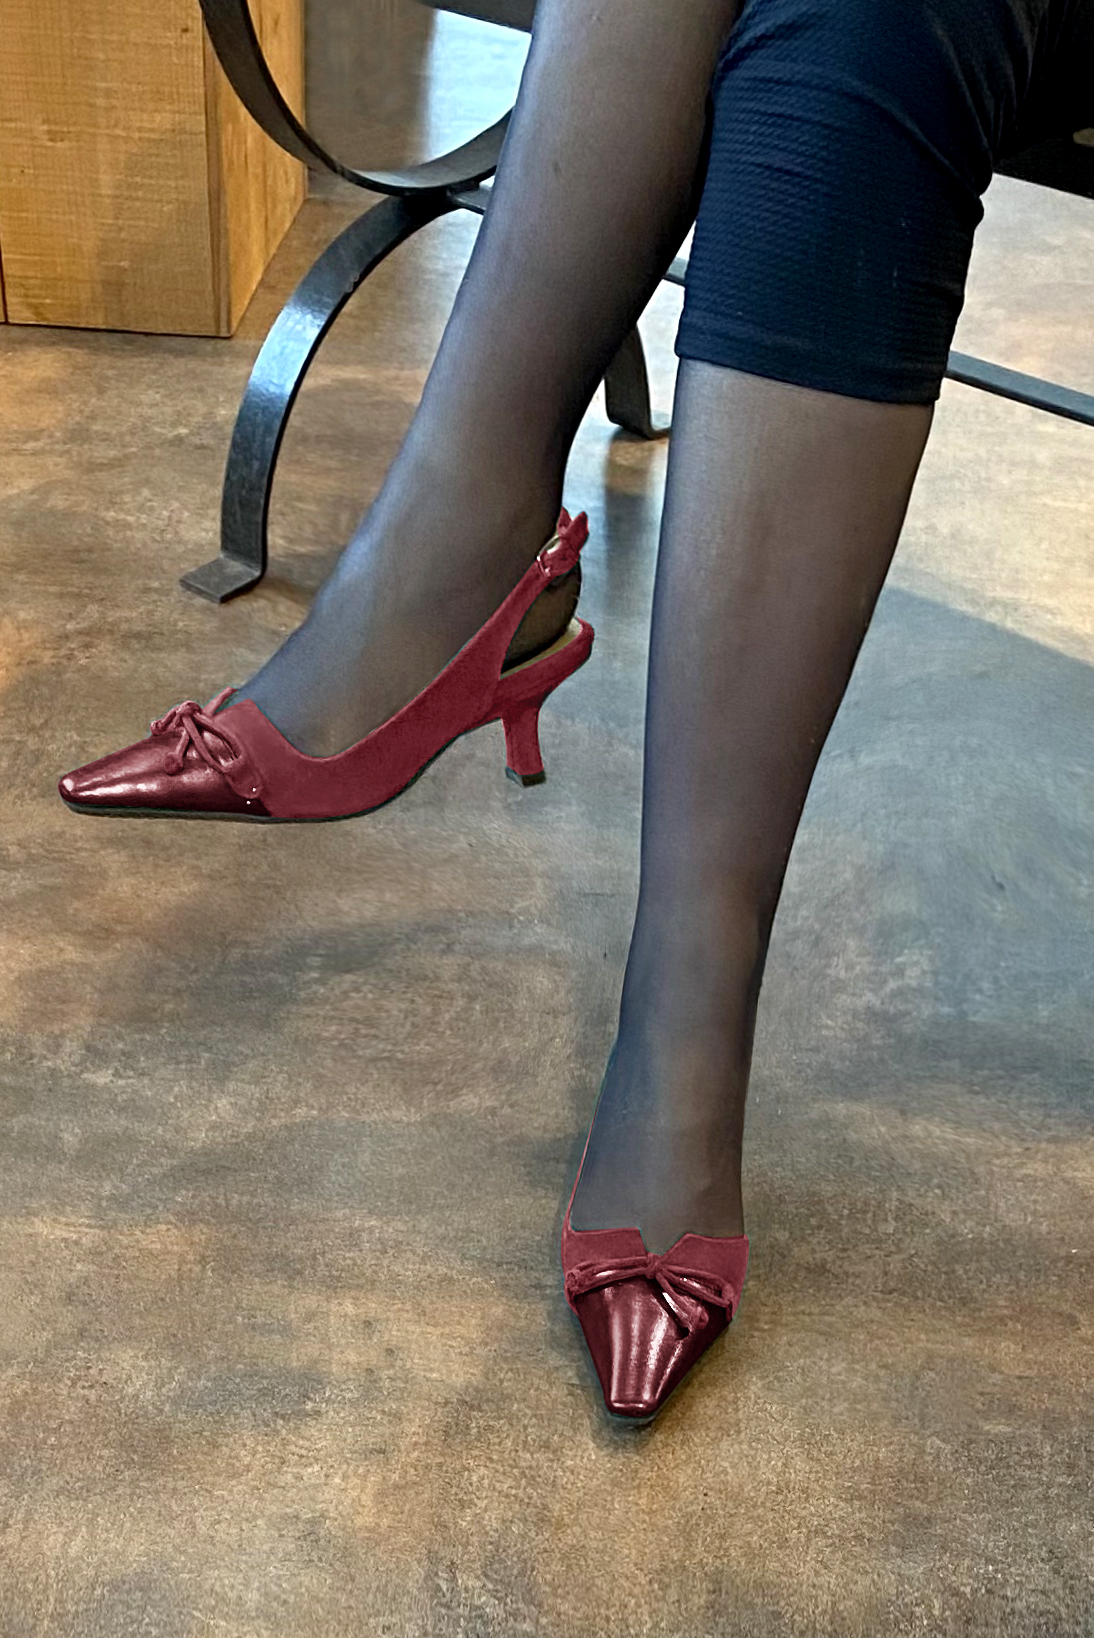 Burgundy red women's open back shoes, with a knot. Tapered toe. Medium spool heels. Worn view - Florence KOOIJMAN